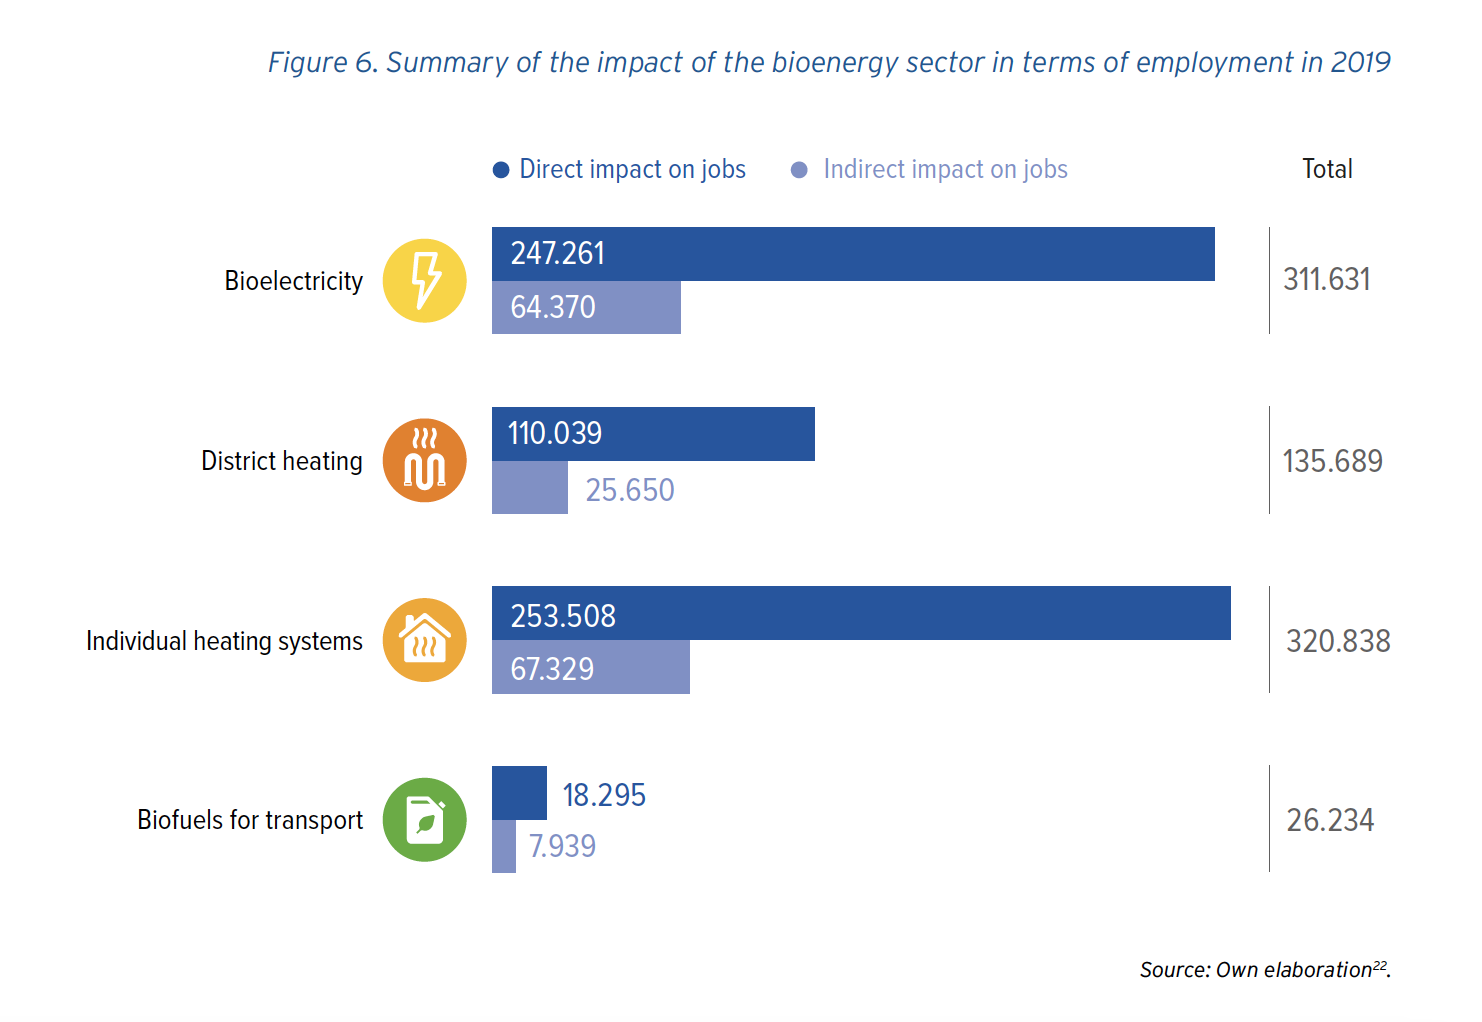 Summary of the impact of the bioenergy sector in terms of employment in 2019